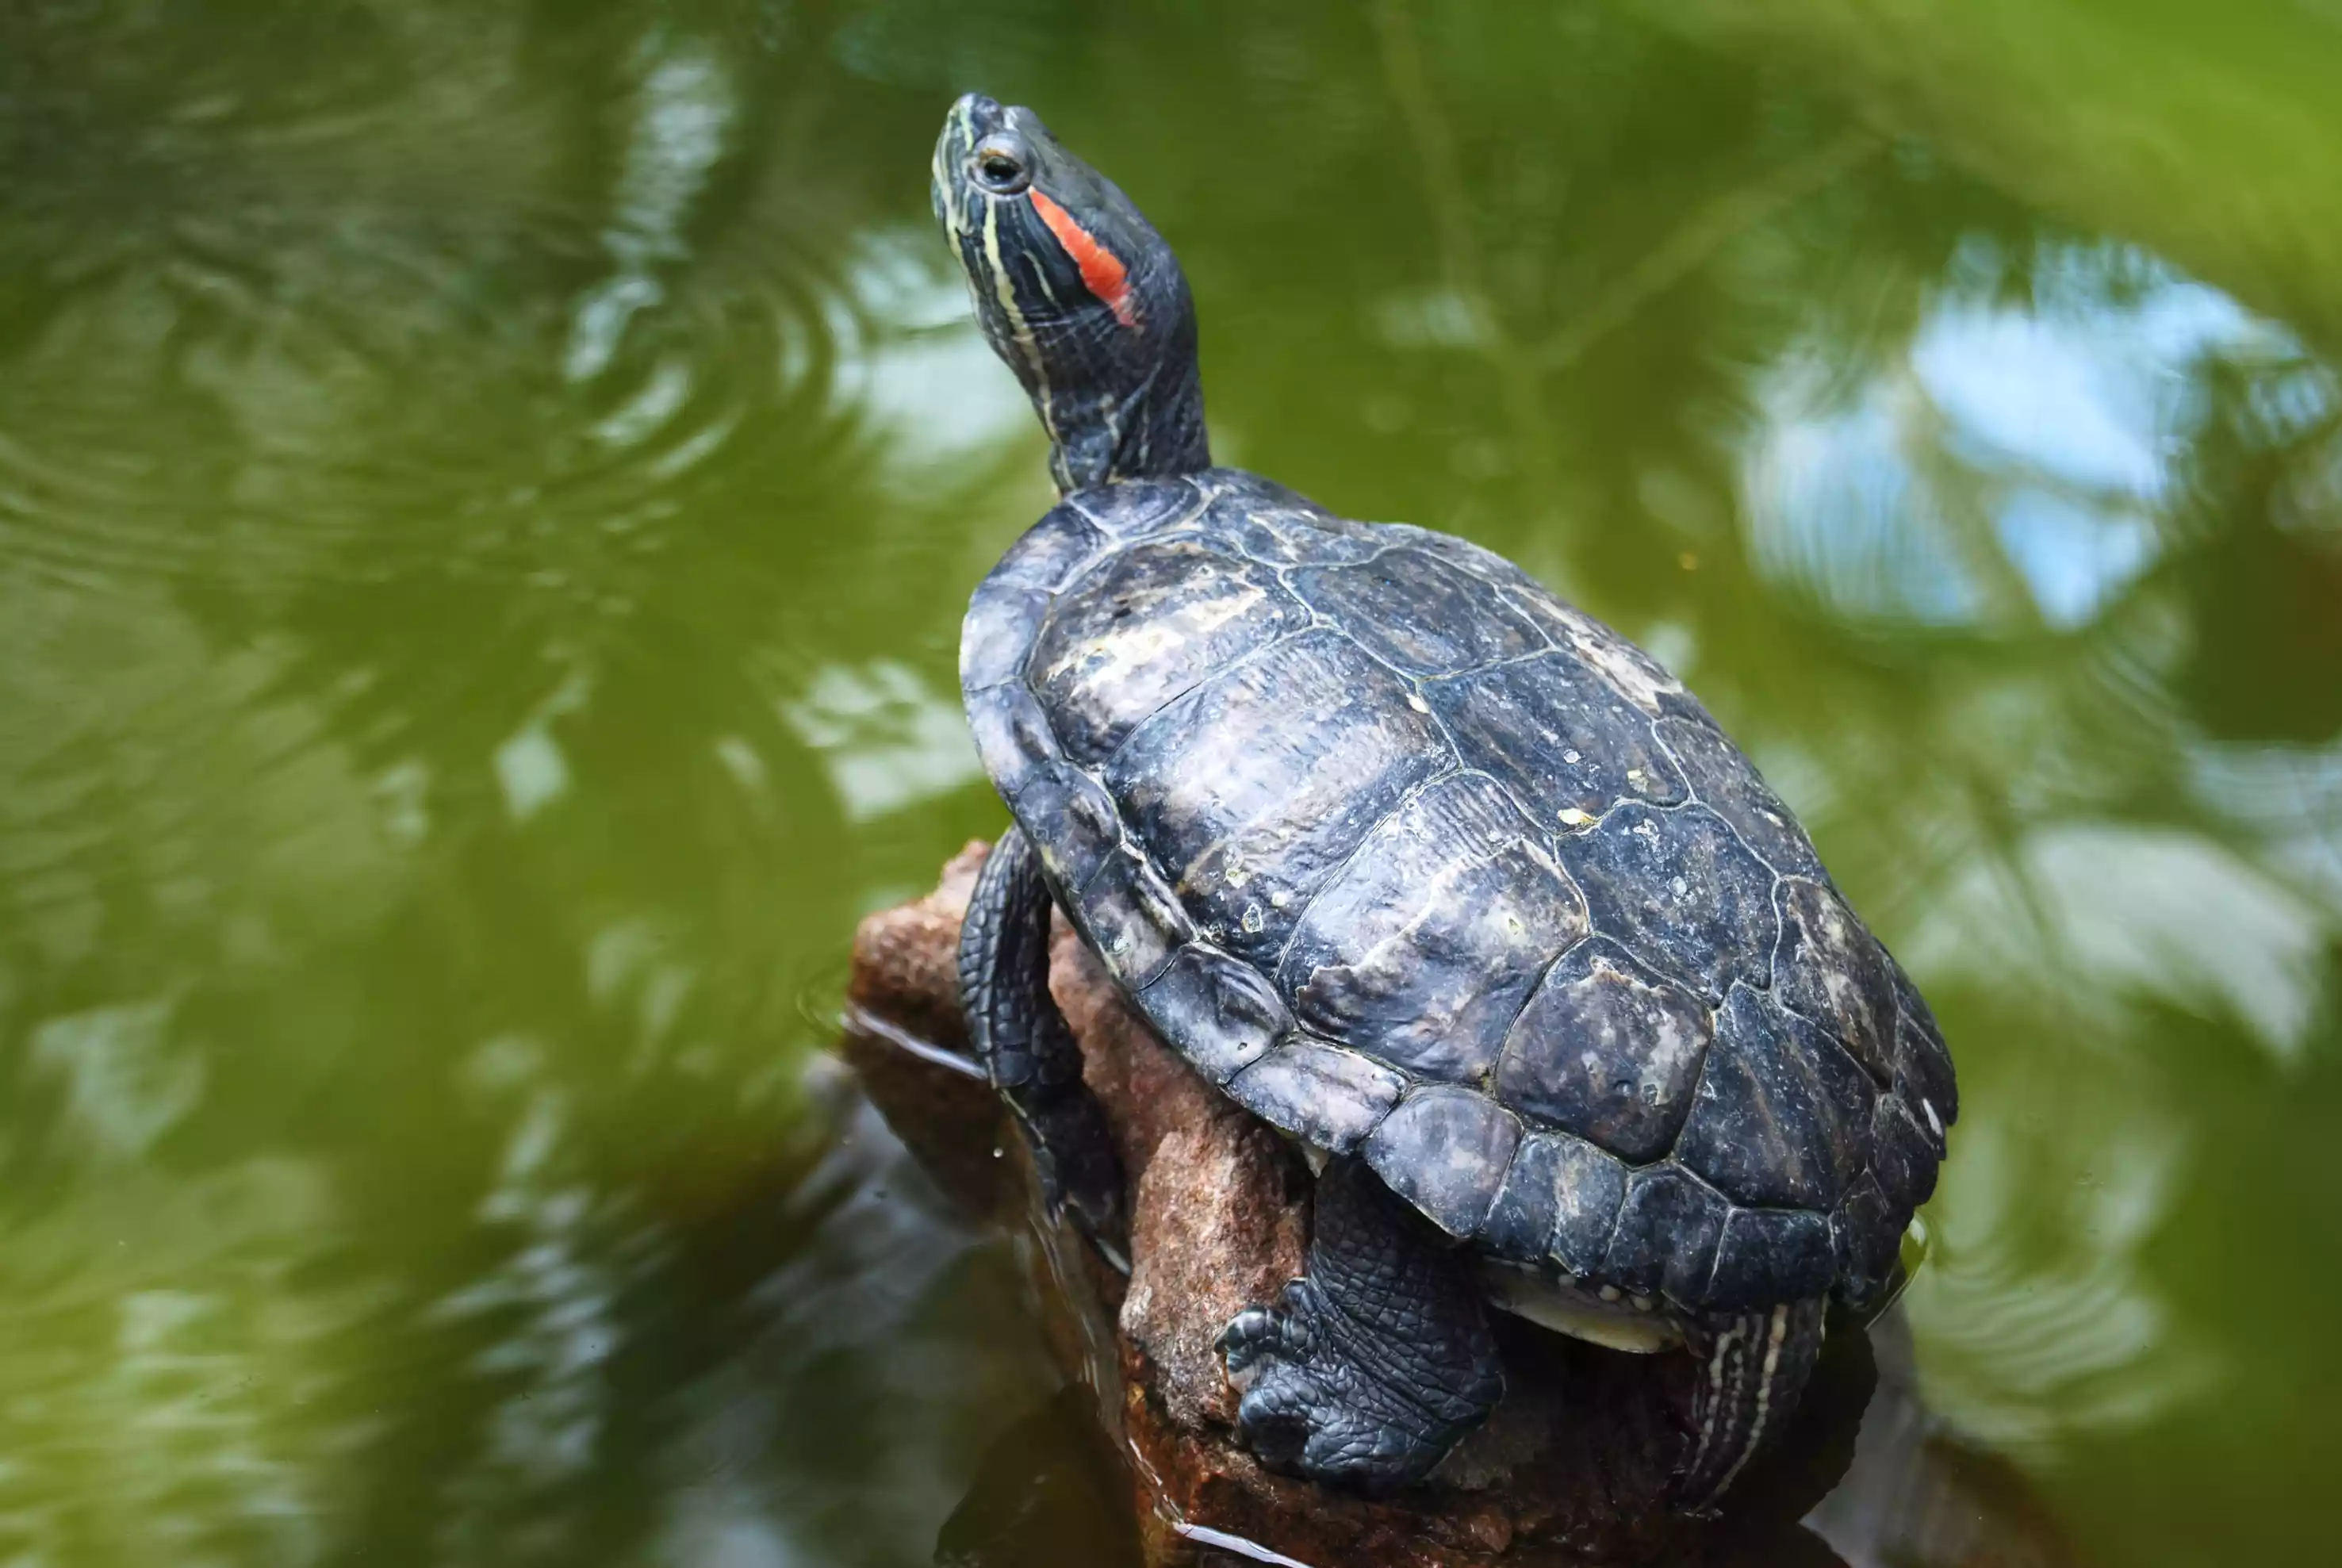 red-eared slider turtle perches on log above water